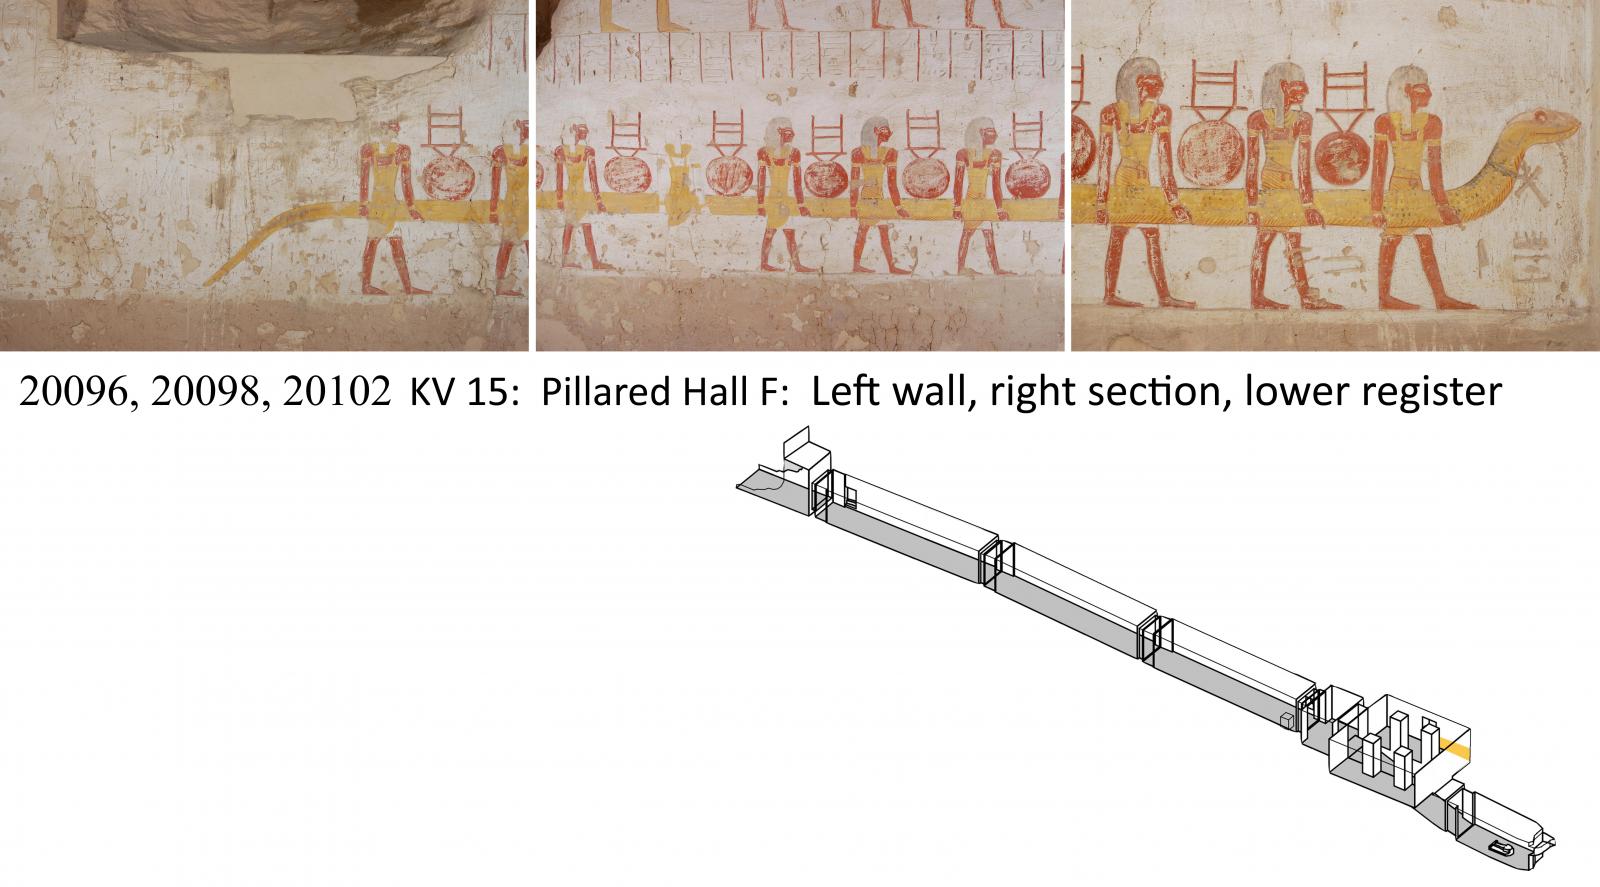 Left wall, right section, lower register.